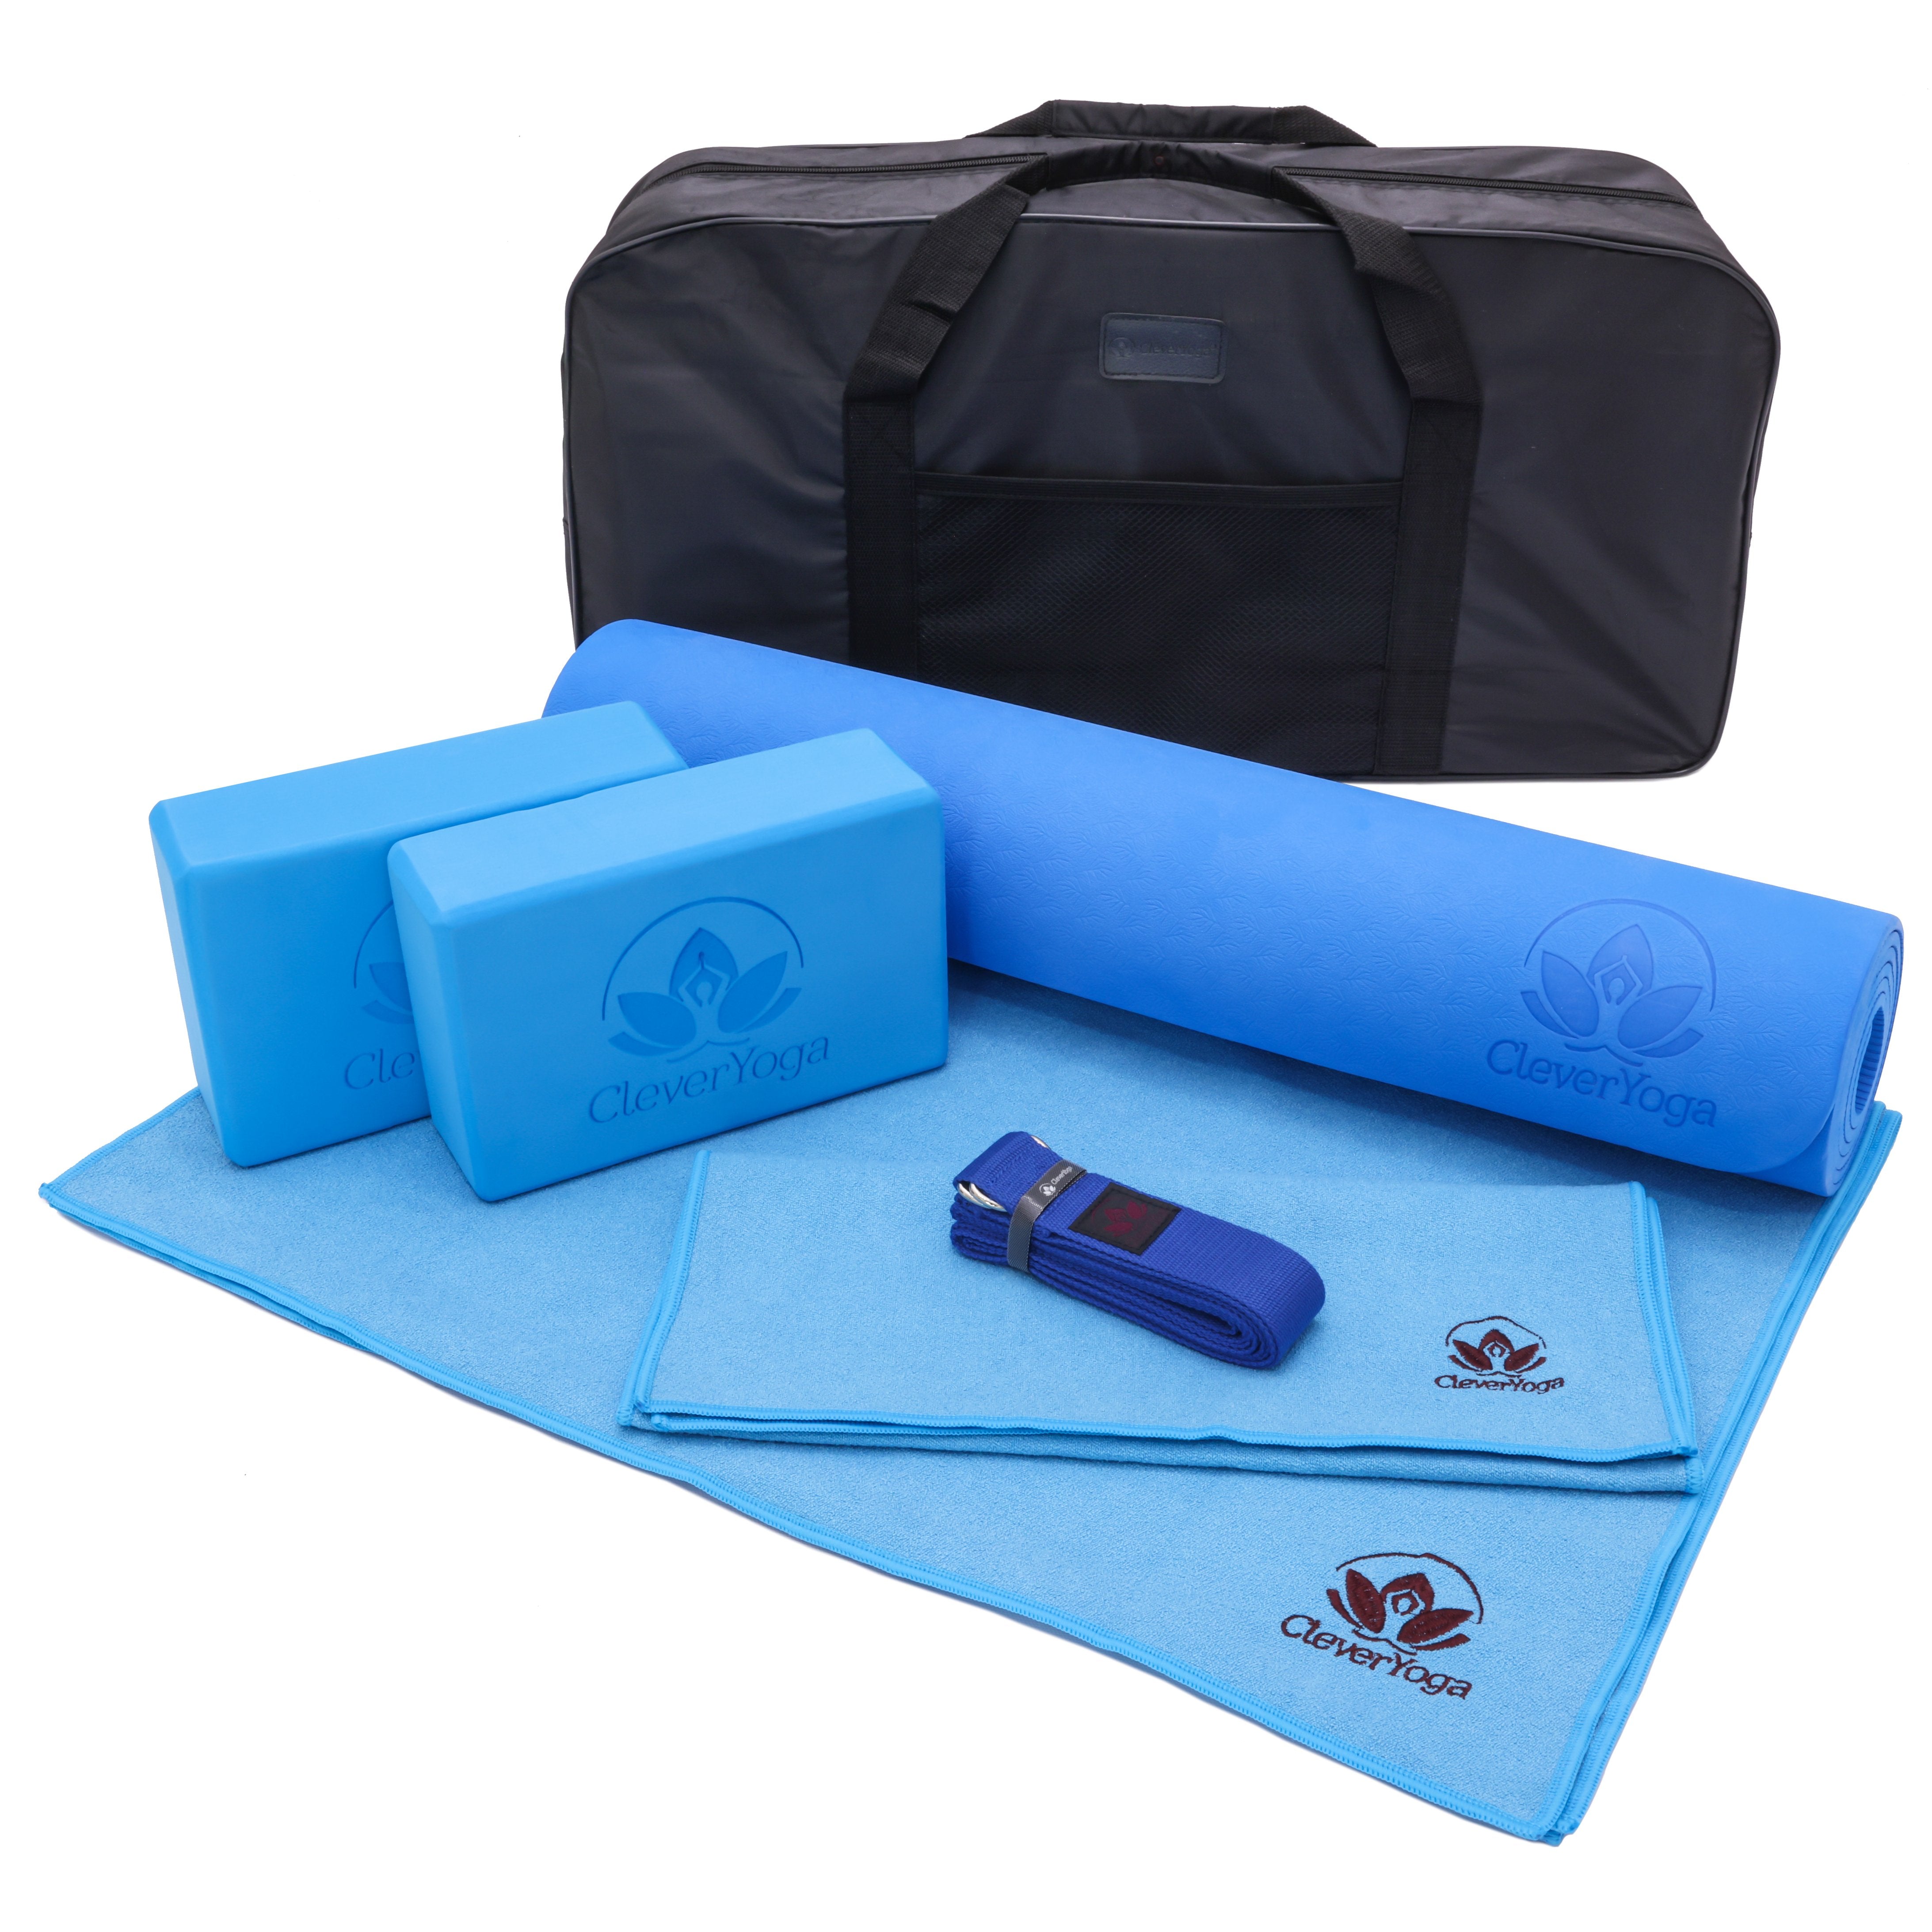 HemingWeigh Yoga Kit and Sets for Beginners, Yoga Mat Set includes